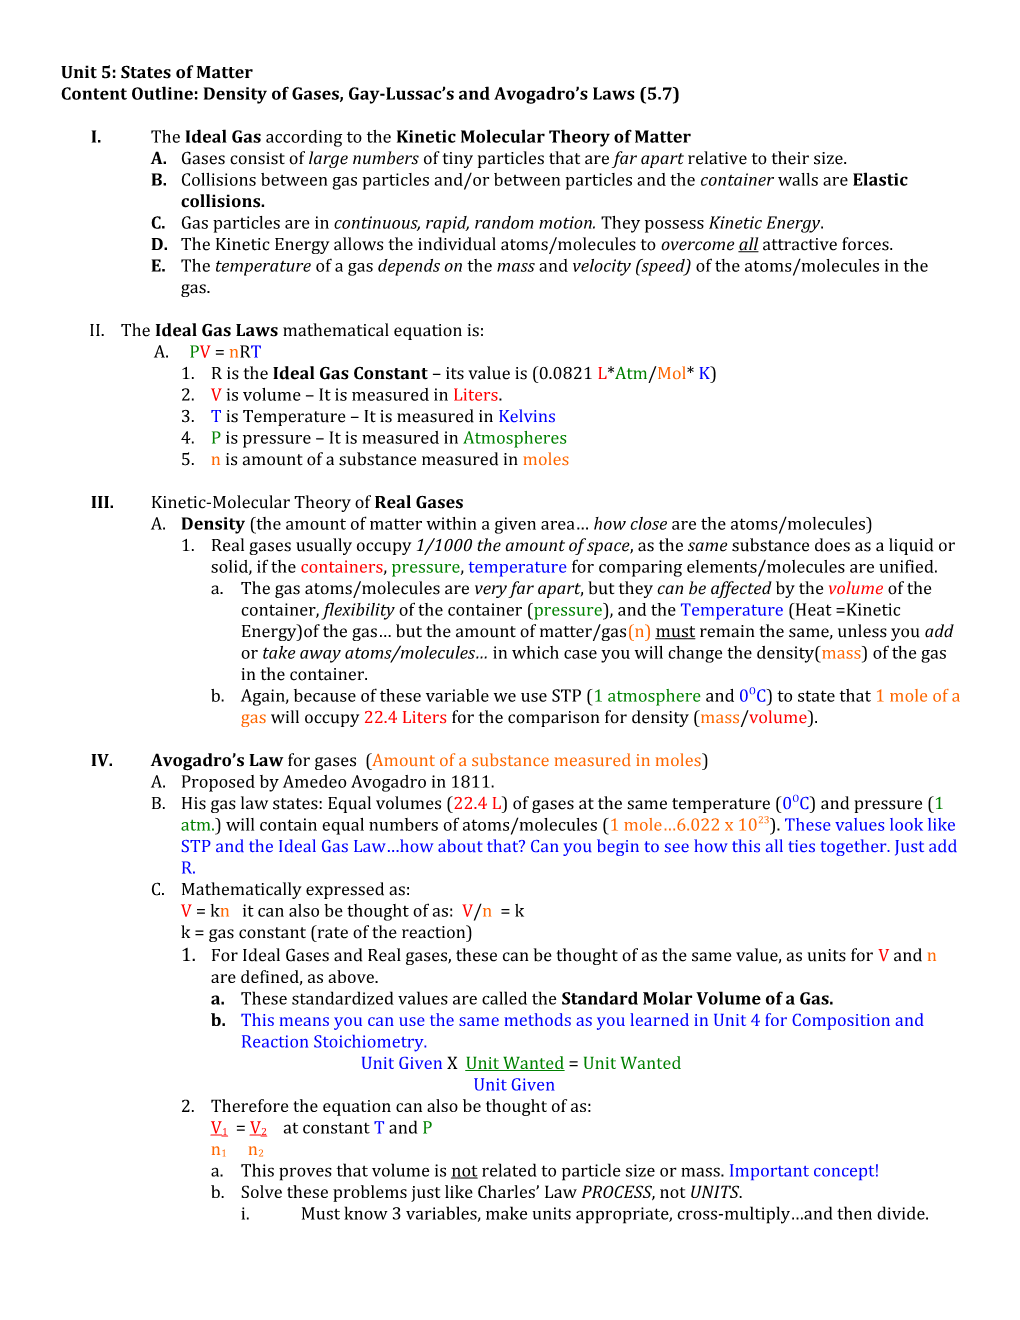 Content Outline: Density of Gases, Gay-Lussac S and Avogadro S Laws (5.7)